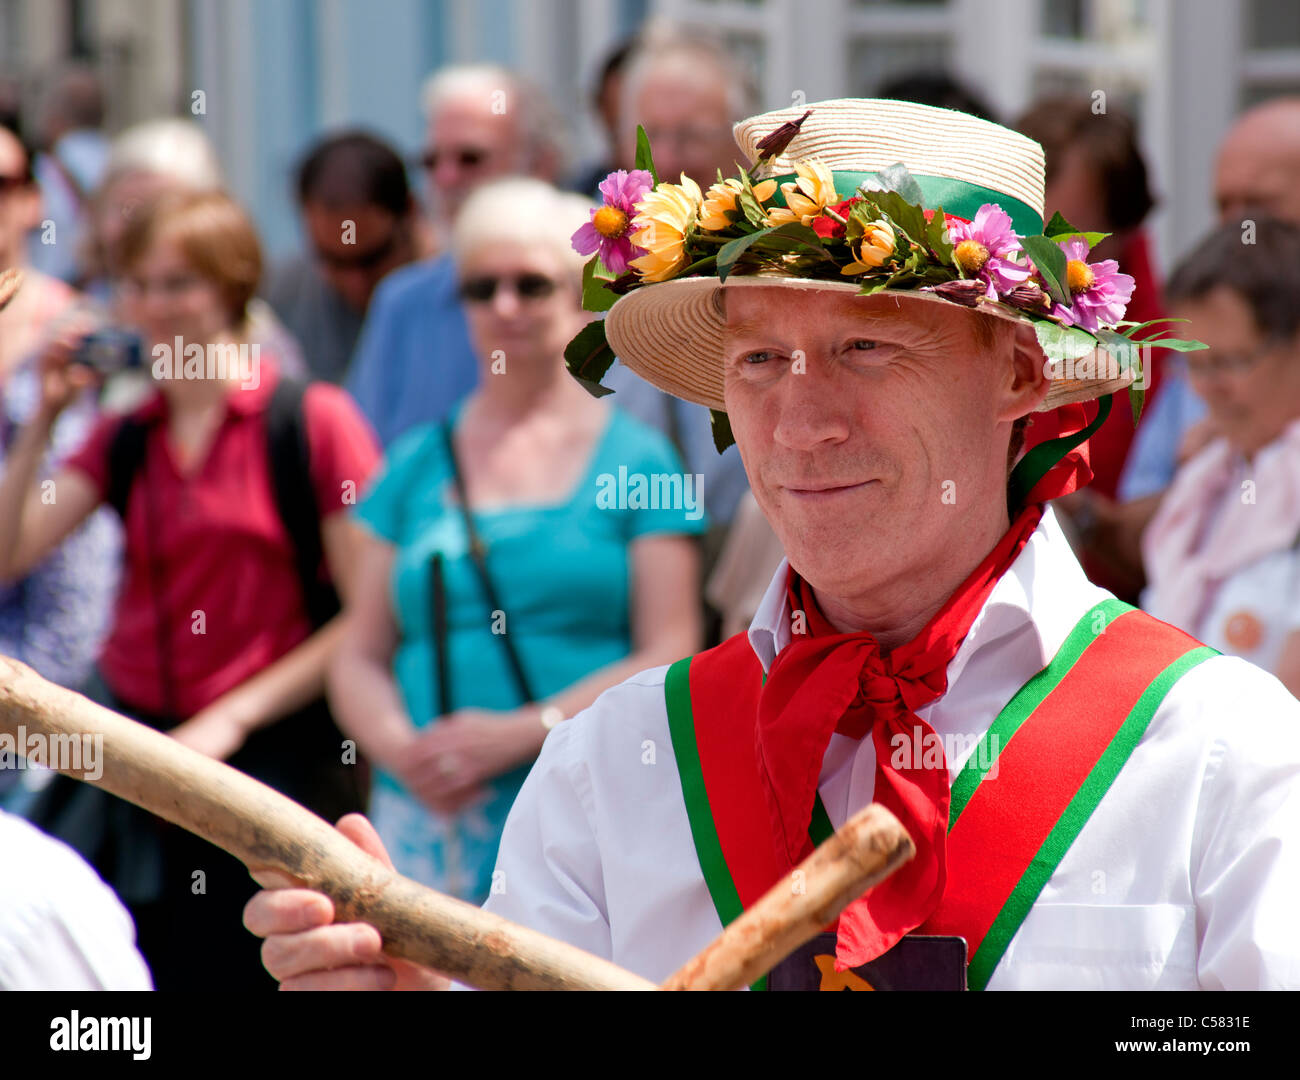 Morris Dancing at the Centenary Morris Dancing Festival in Thaxted, Essex, England, in 2011 Stock Photo